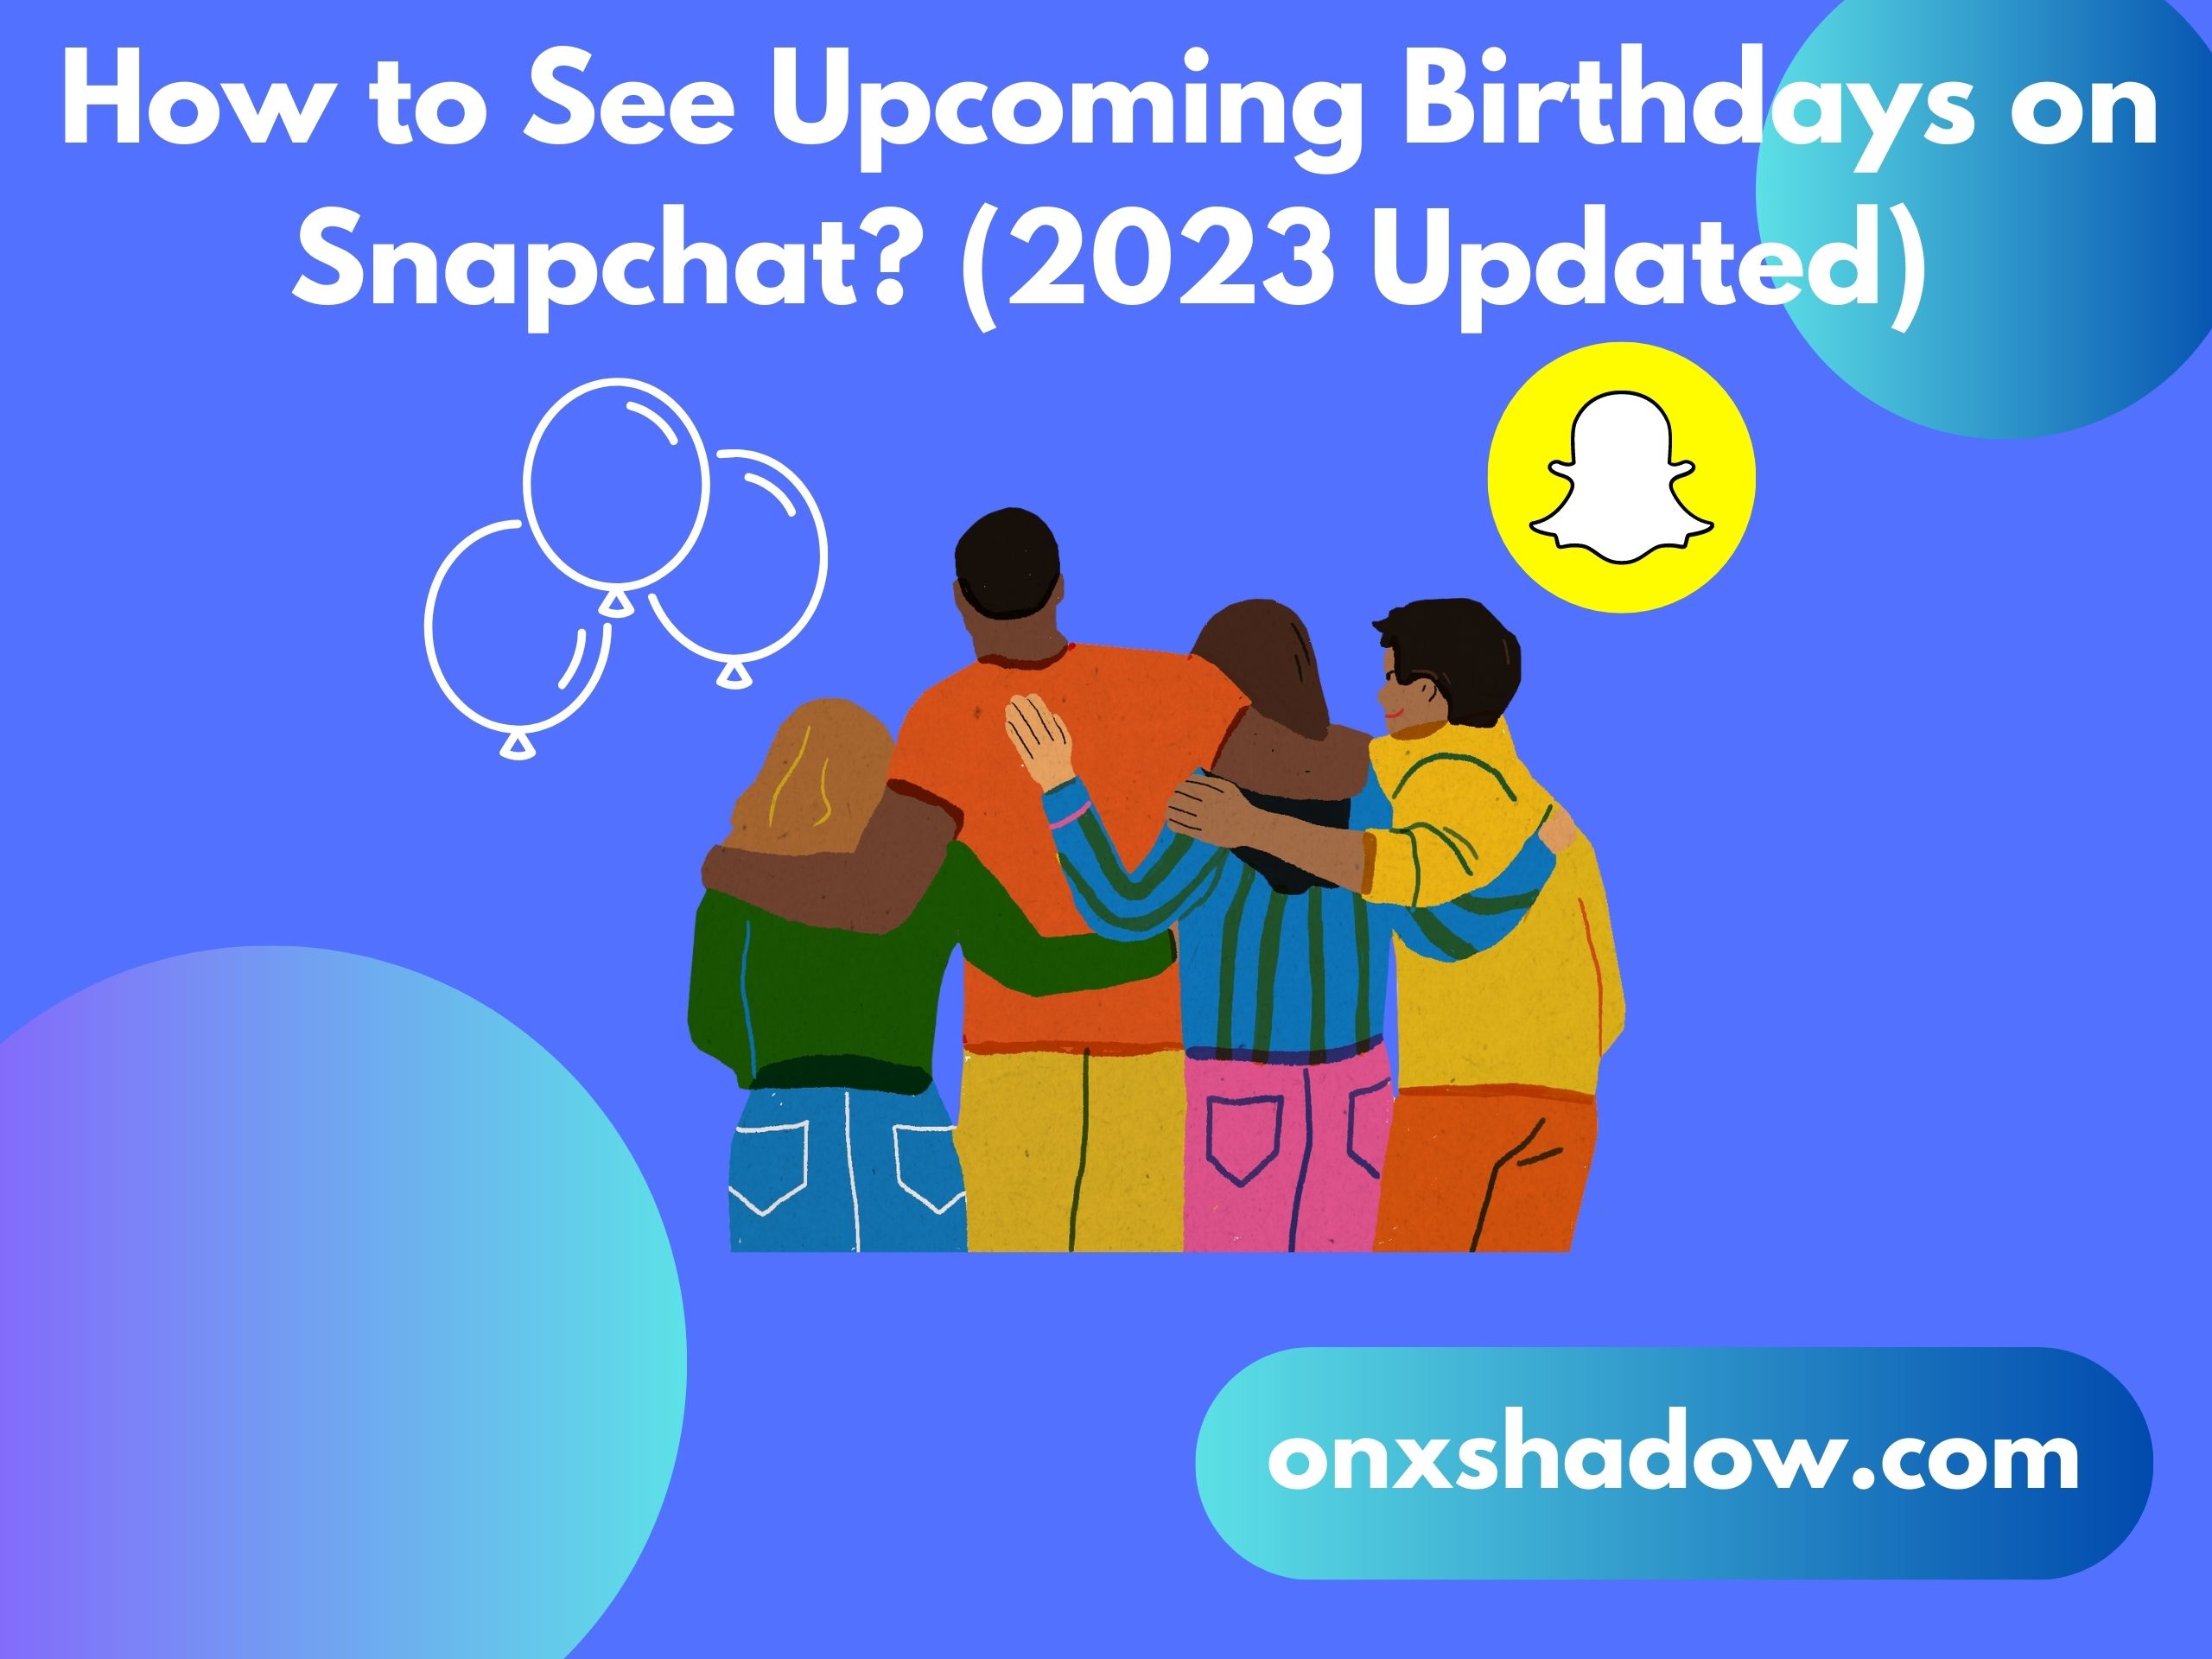 How to See Upcoming Birthdays on Snapchat? (2023 Updated)